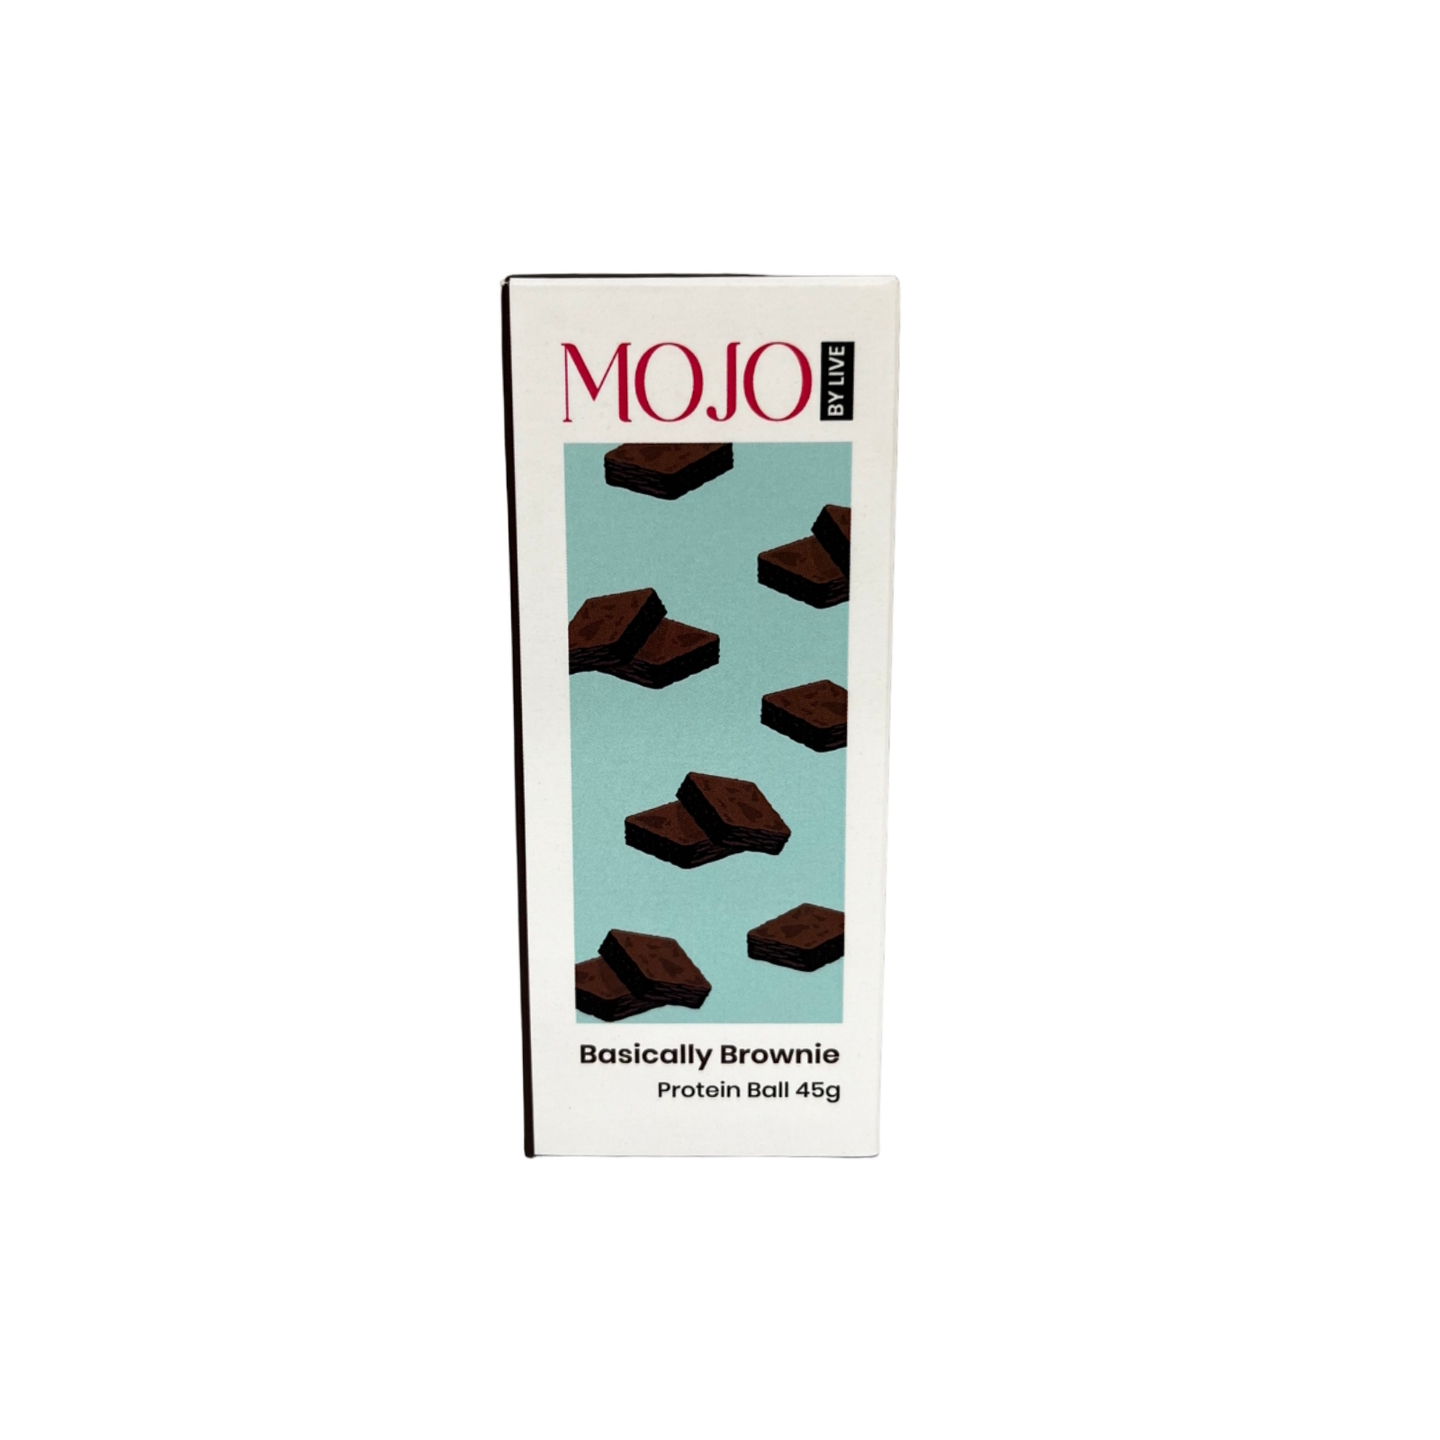 Mojo Protein Balls - Basically Brownies 7G Proteins 45 gm